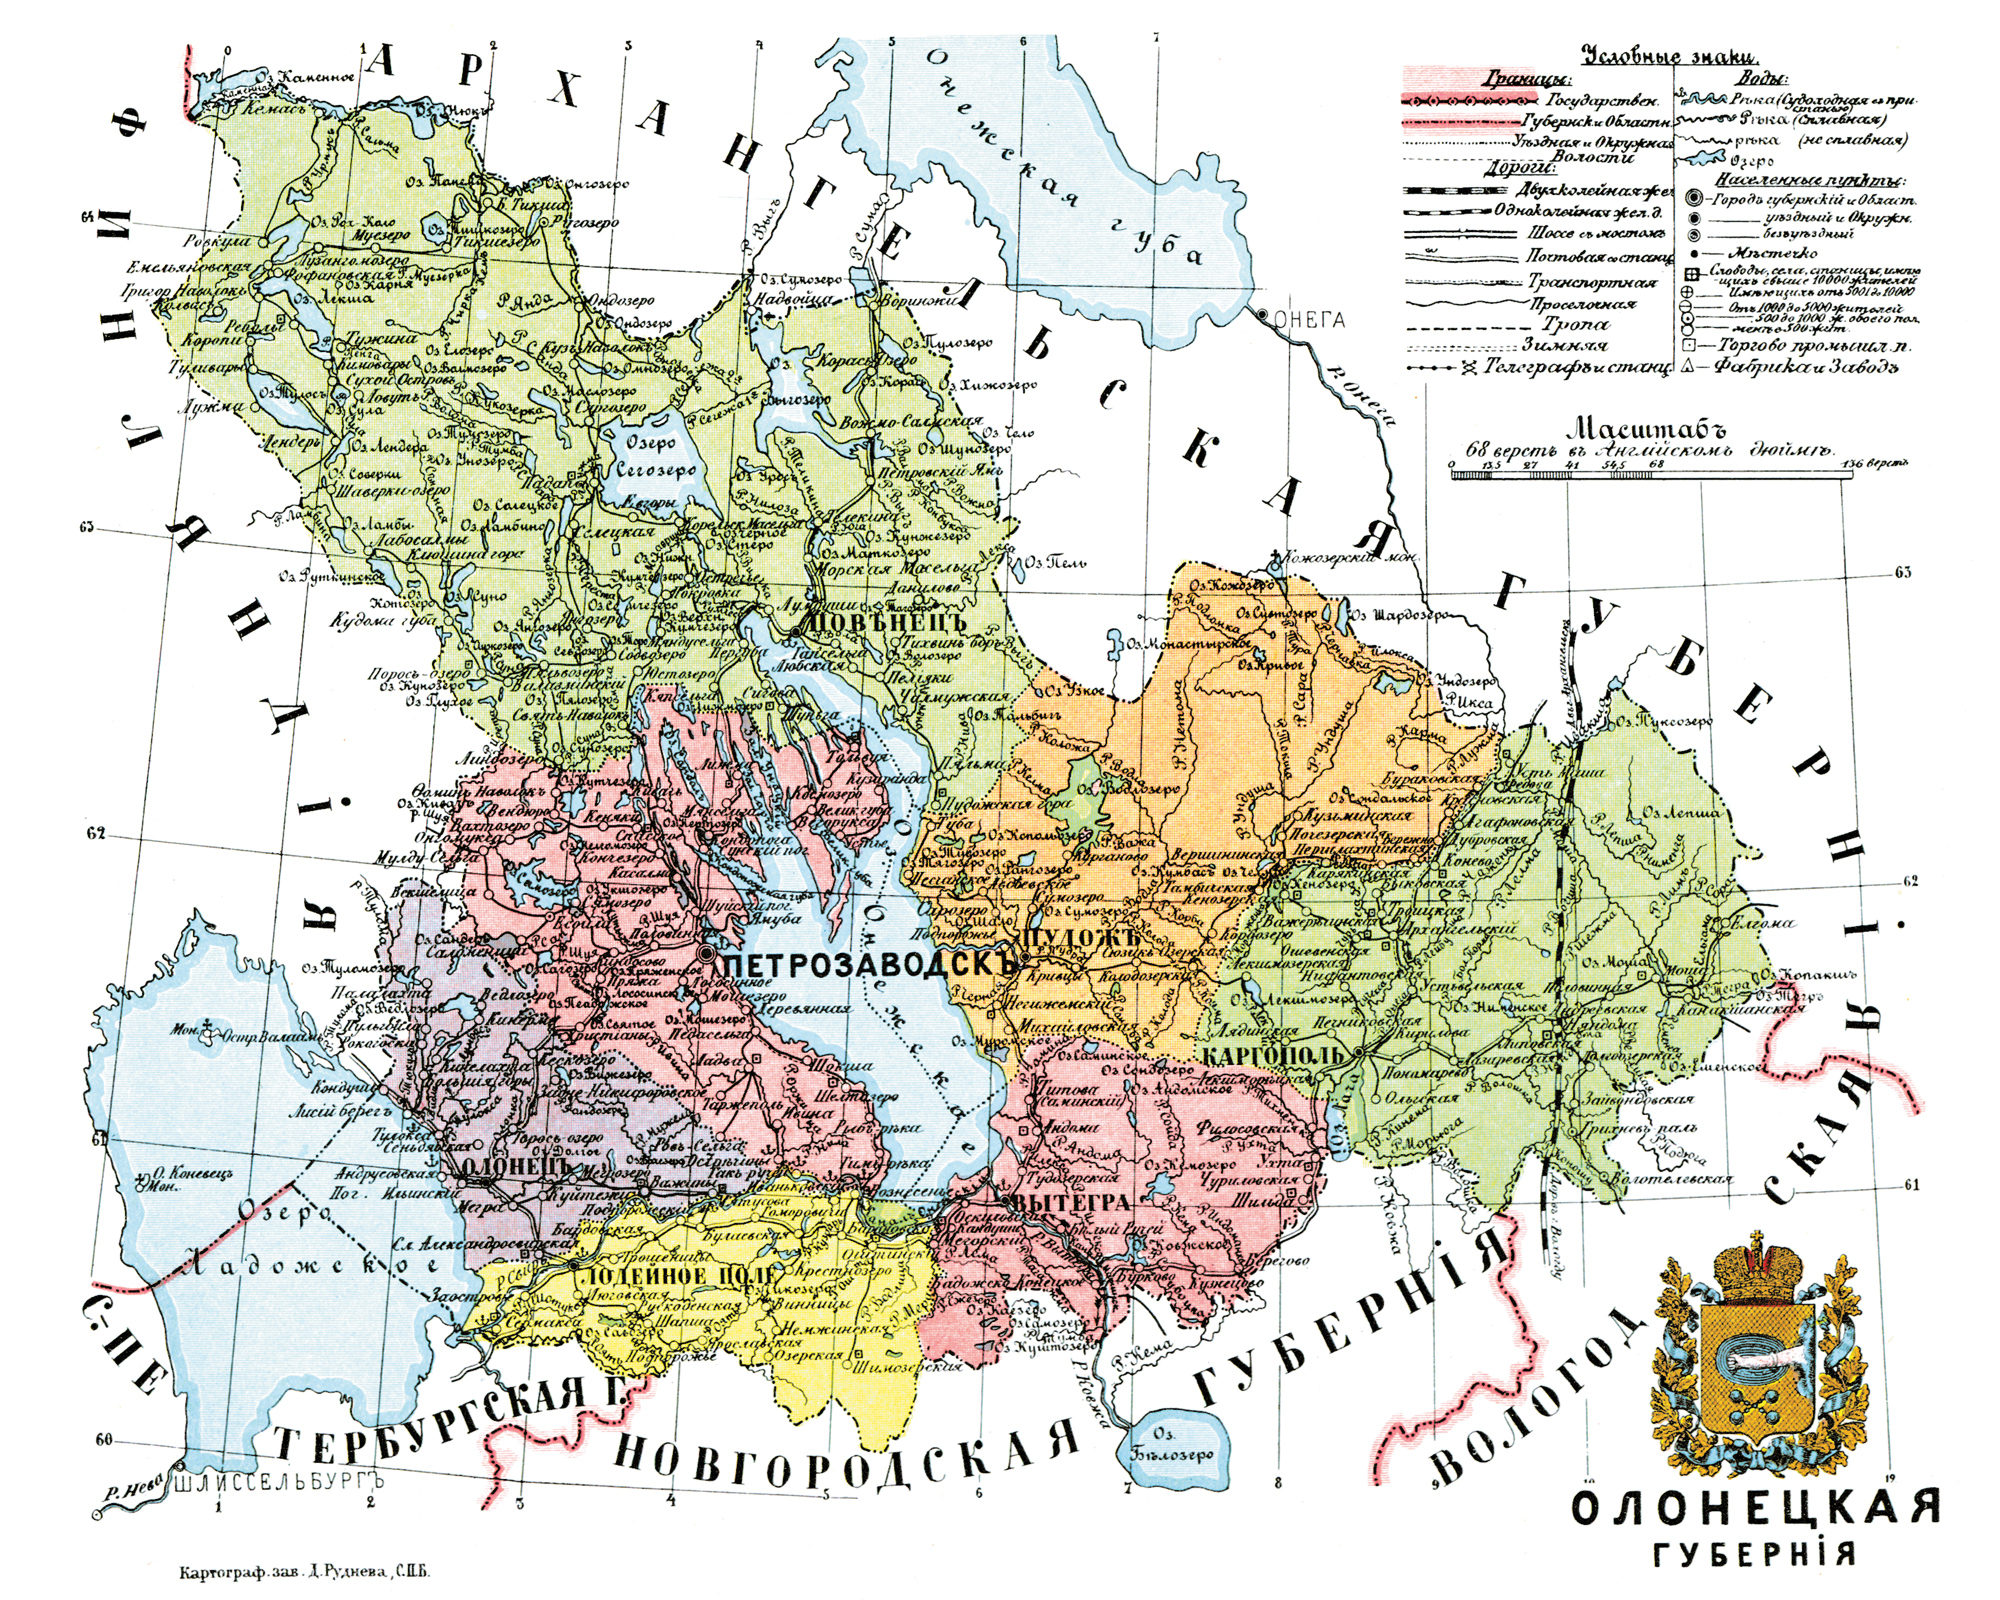 1913. Olonets Governorate